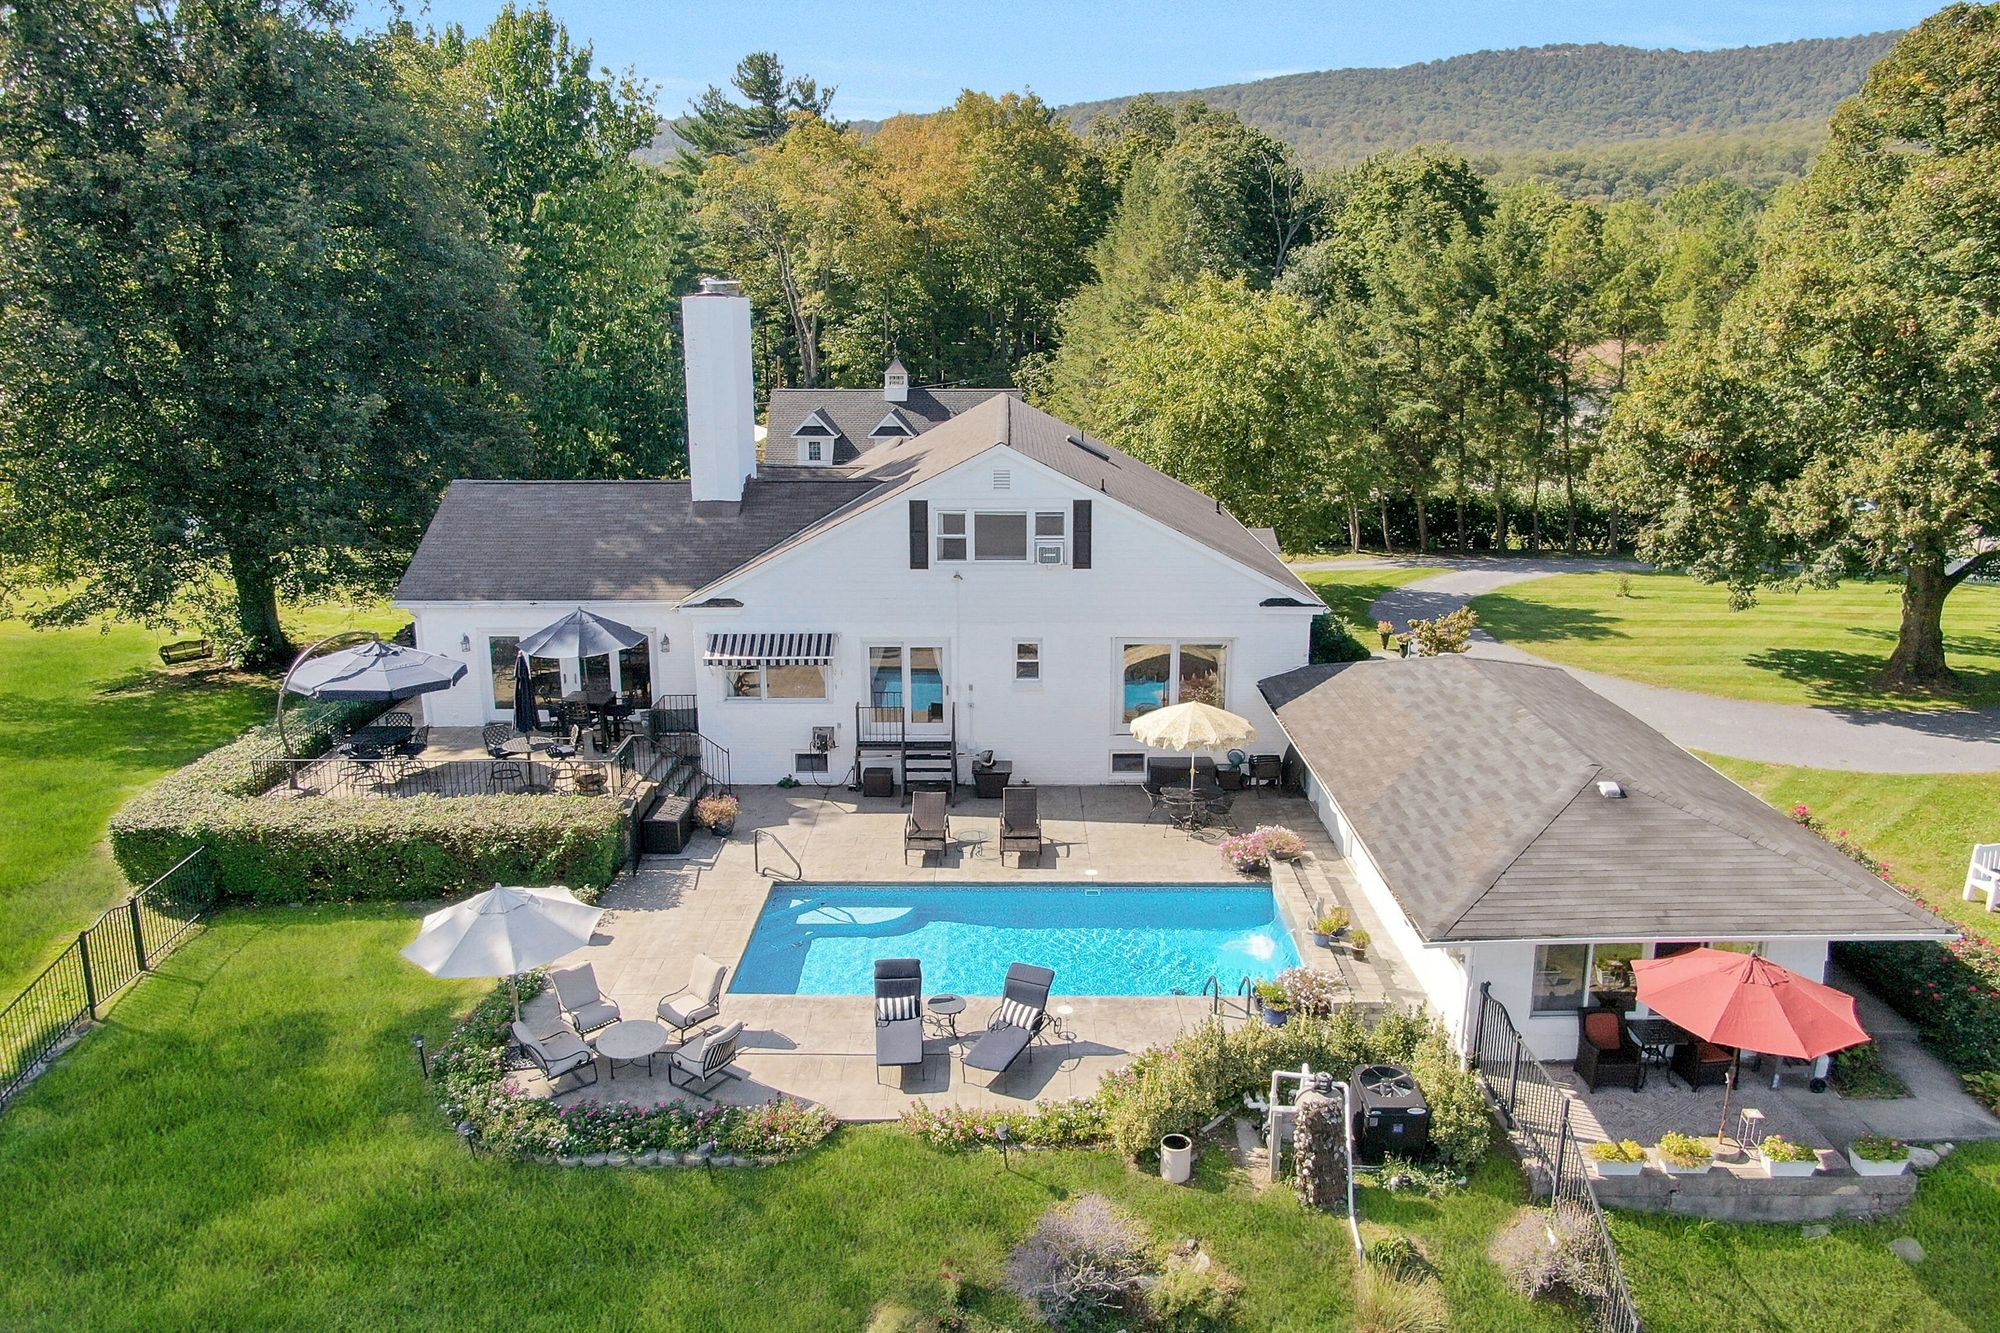 Home That Inspired Billy Joel’s ‘New York State of Mind’ Is Up for Sale